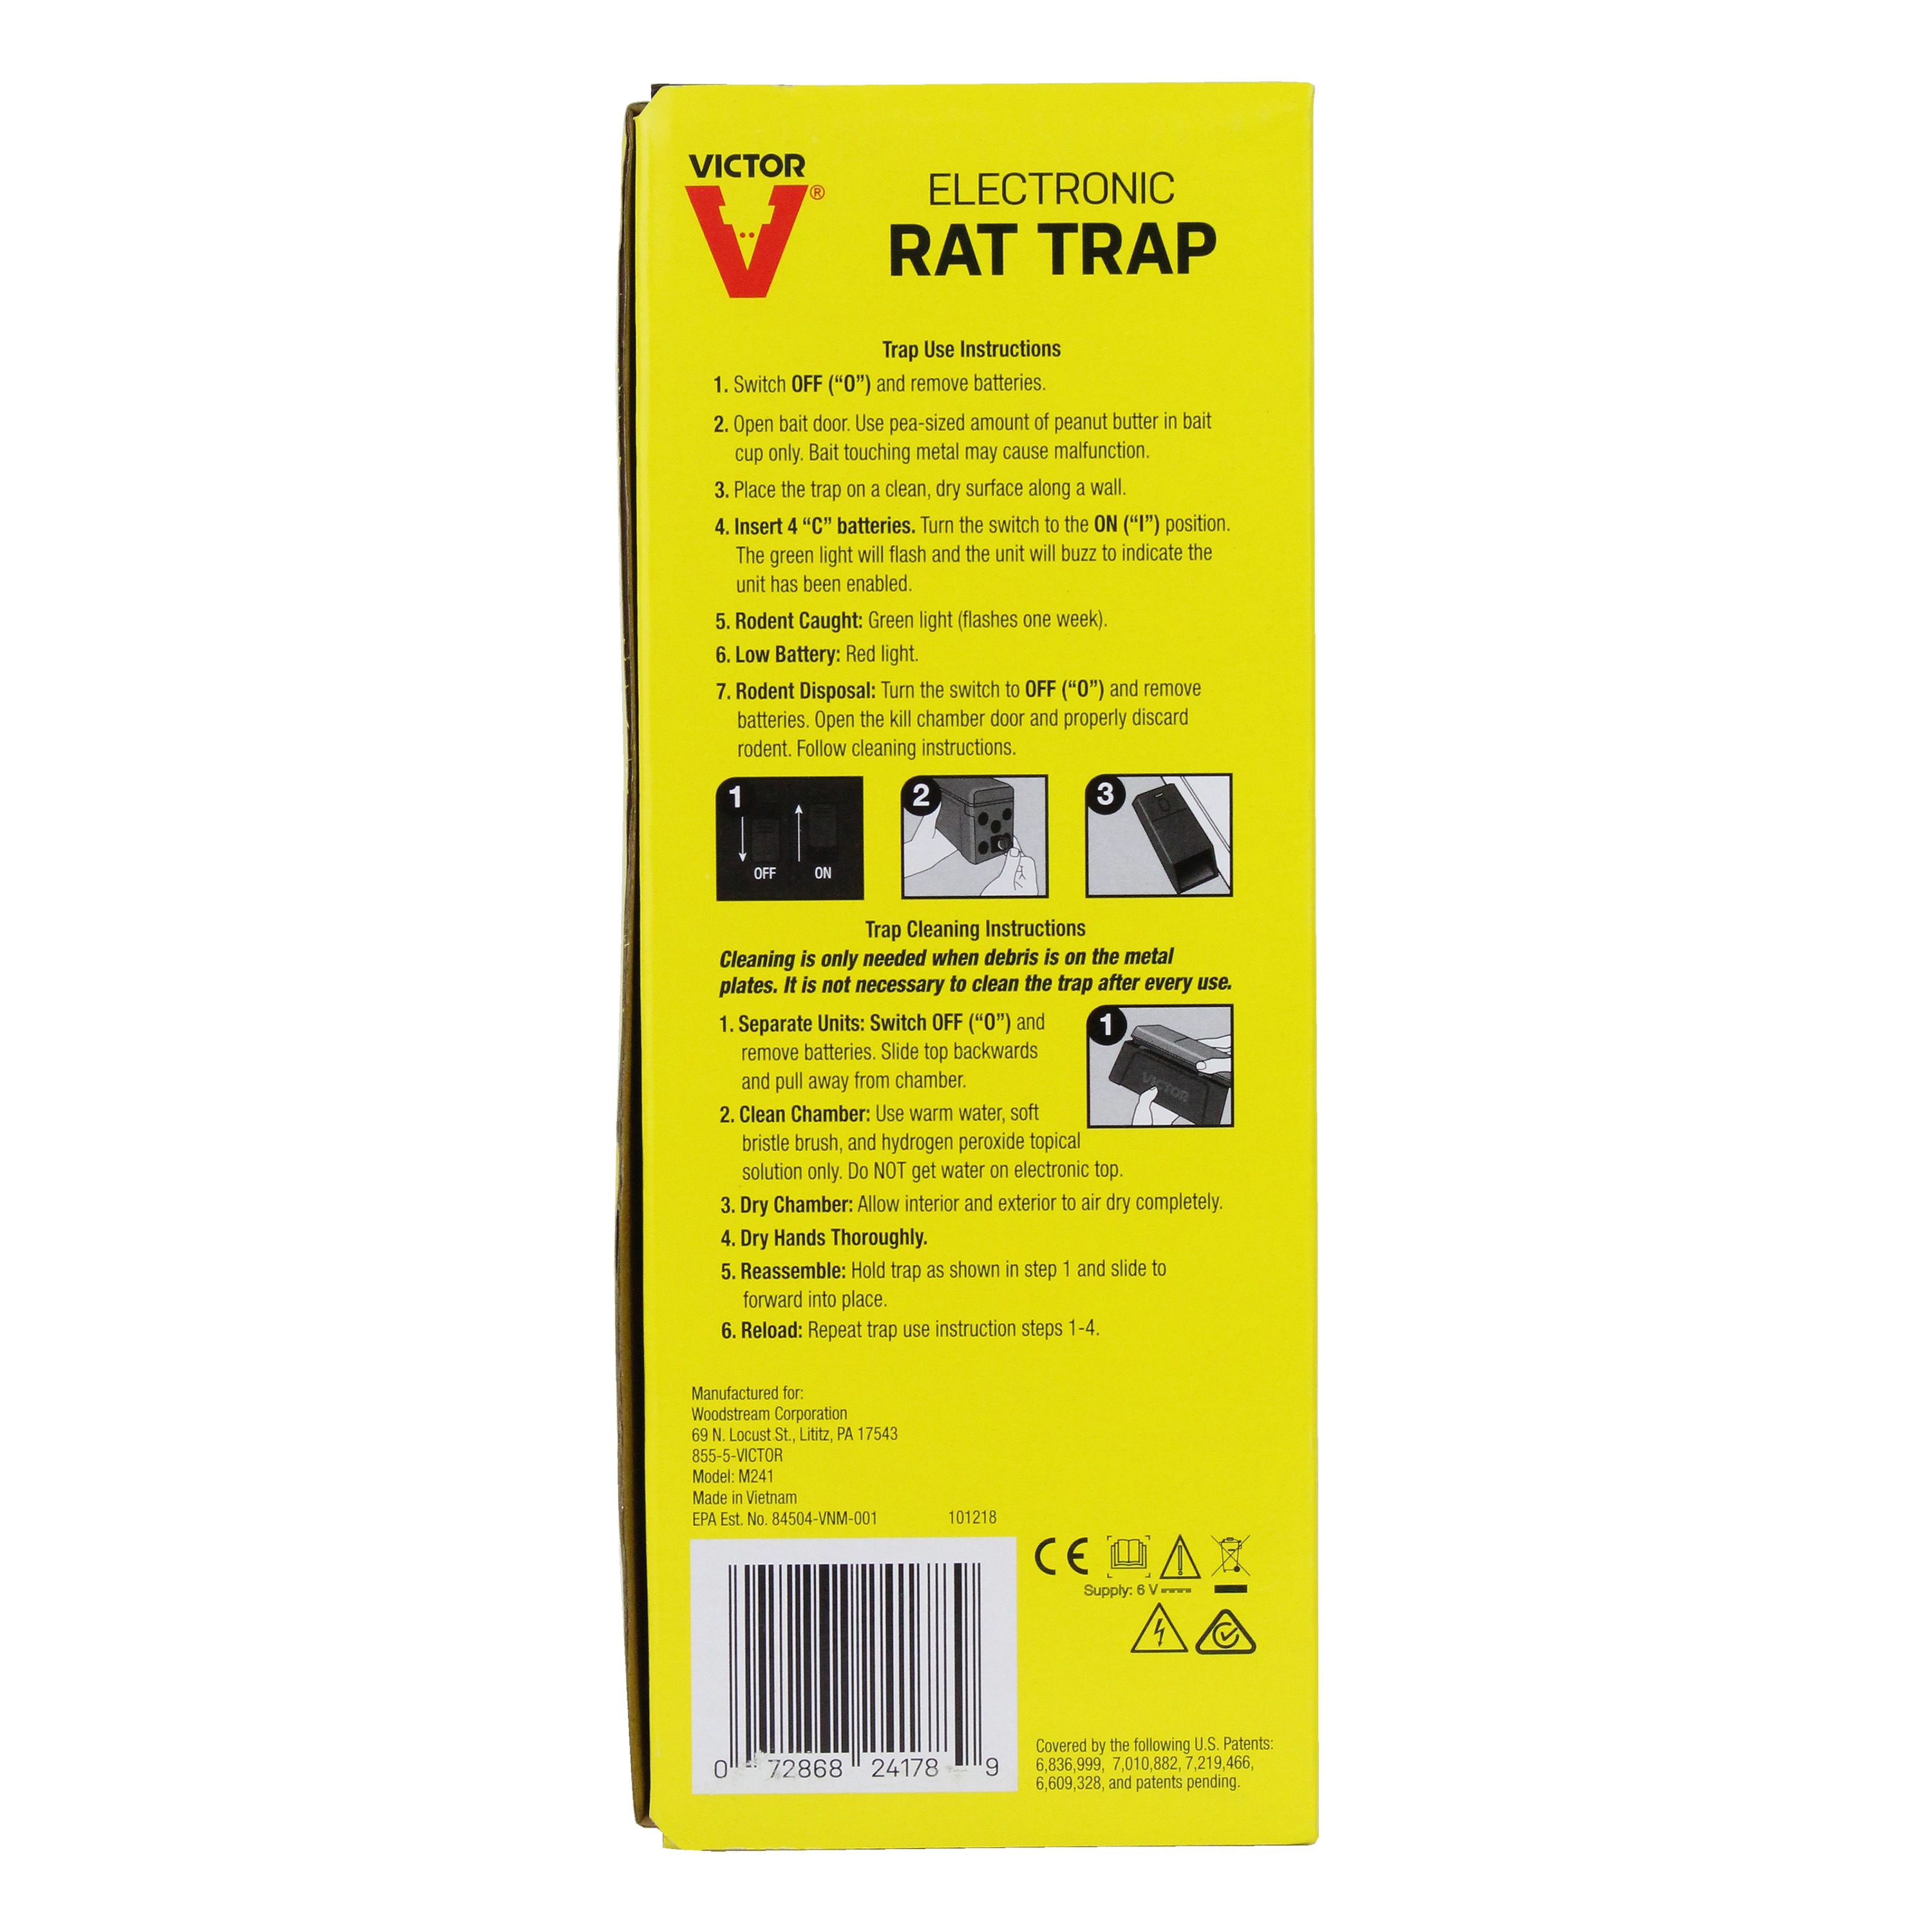 One Of The Easiest Ways To Catch A Rat - The Victor Electronic Rat